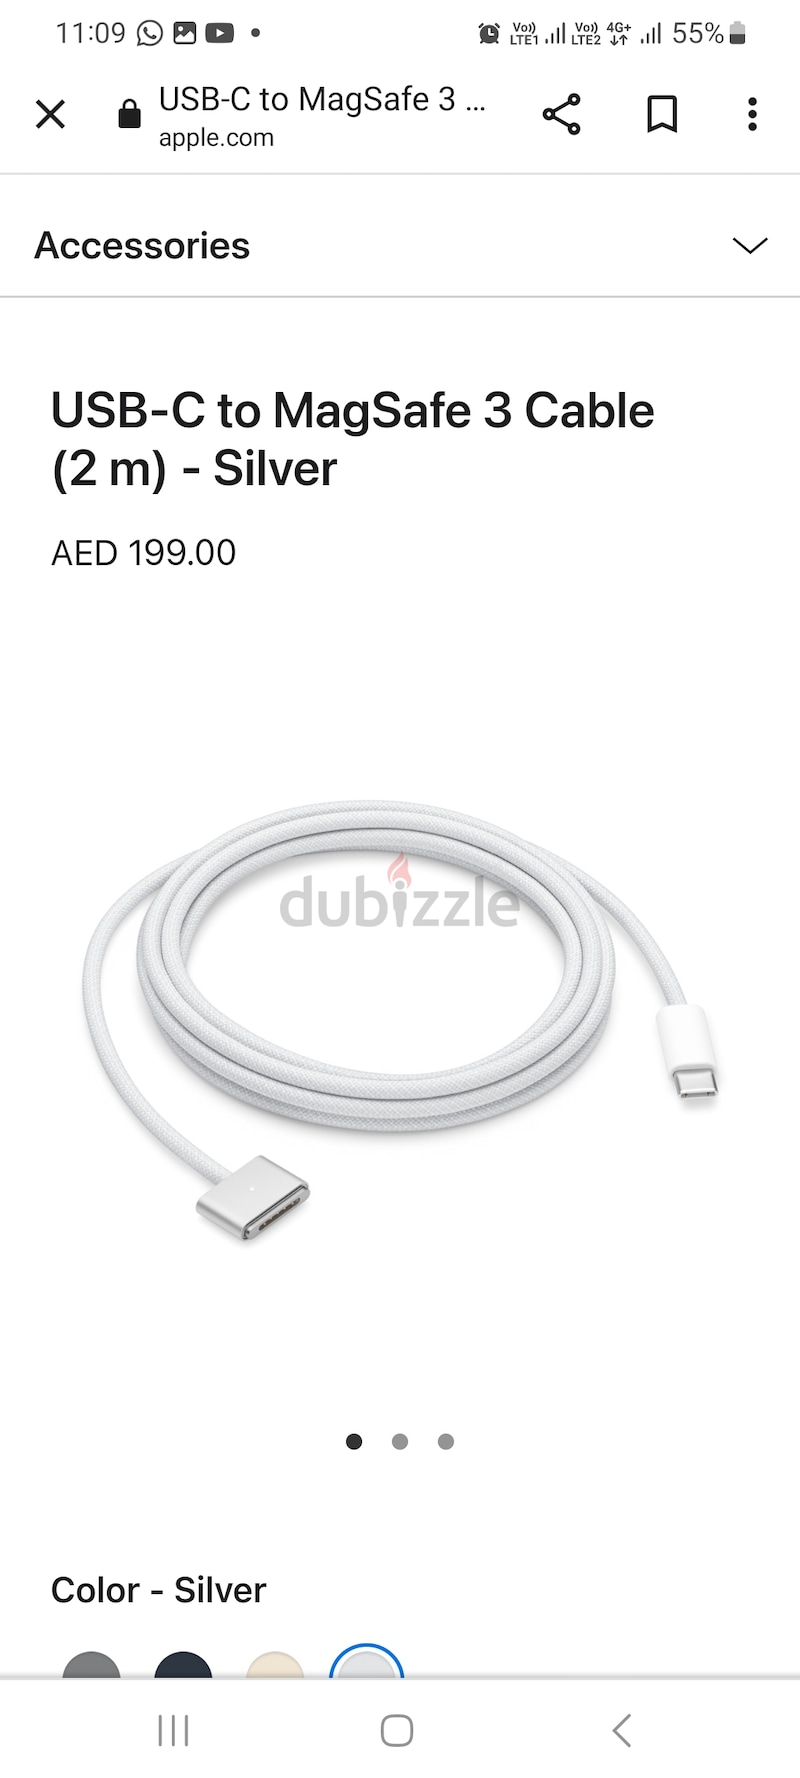 USB-C to MagSafe 3 Cable (2 m) - Silver - Apple